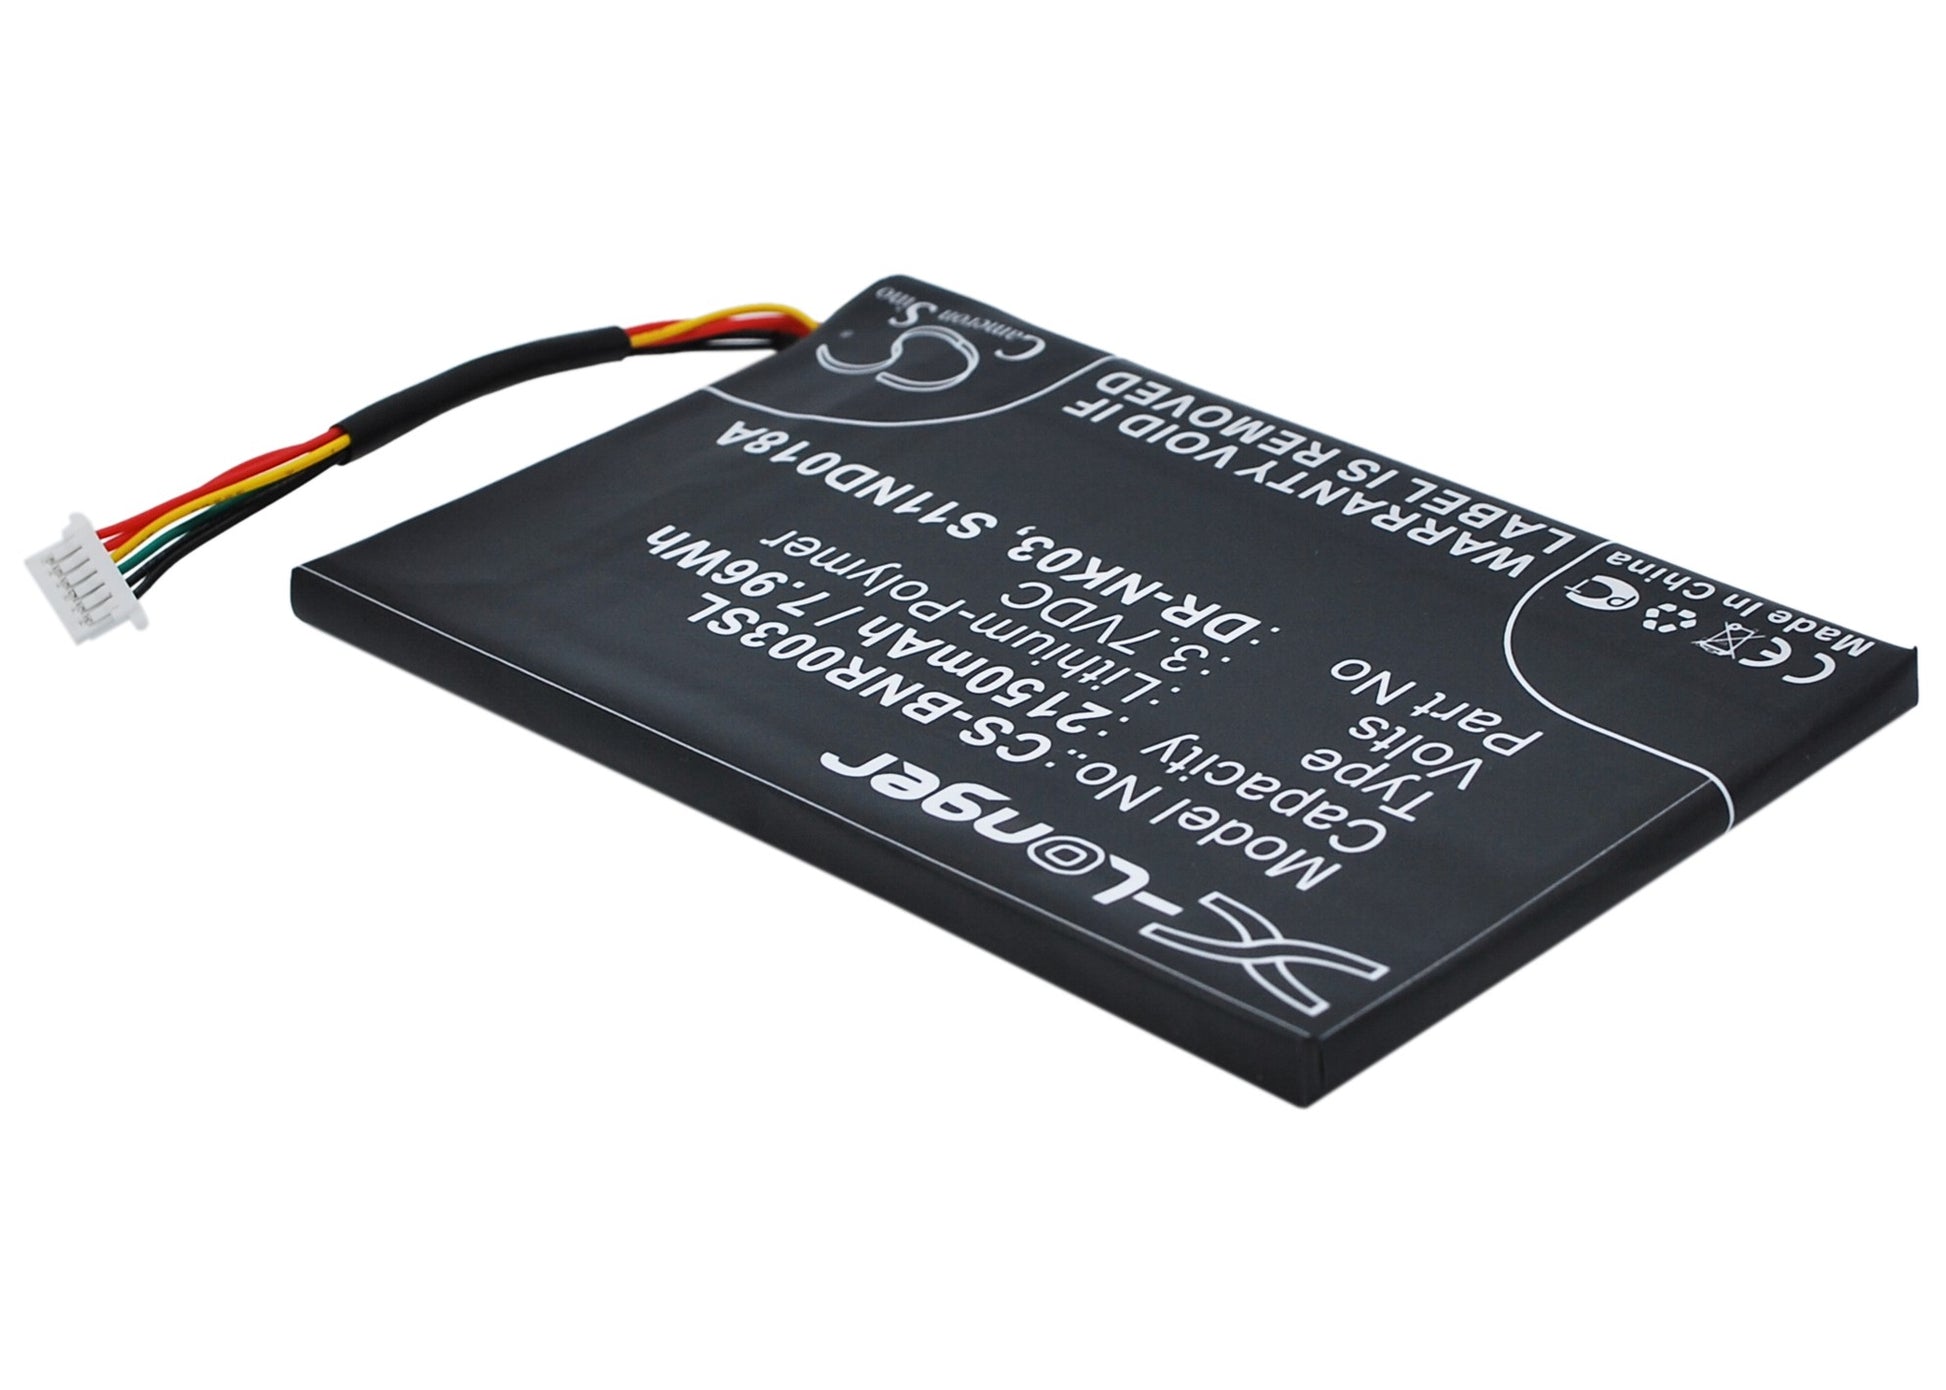 Replacement DR-NK03 Battery for Barnes & Noble Nook Simple Touch 6" BNTV350, BNRV300-SMAVtronics